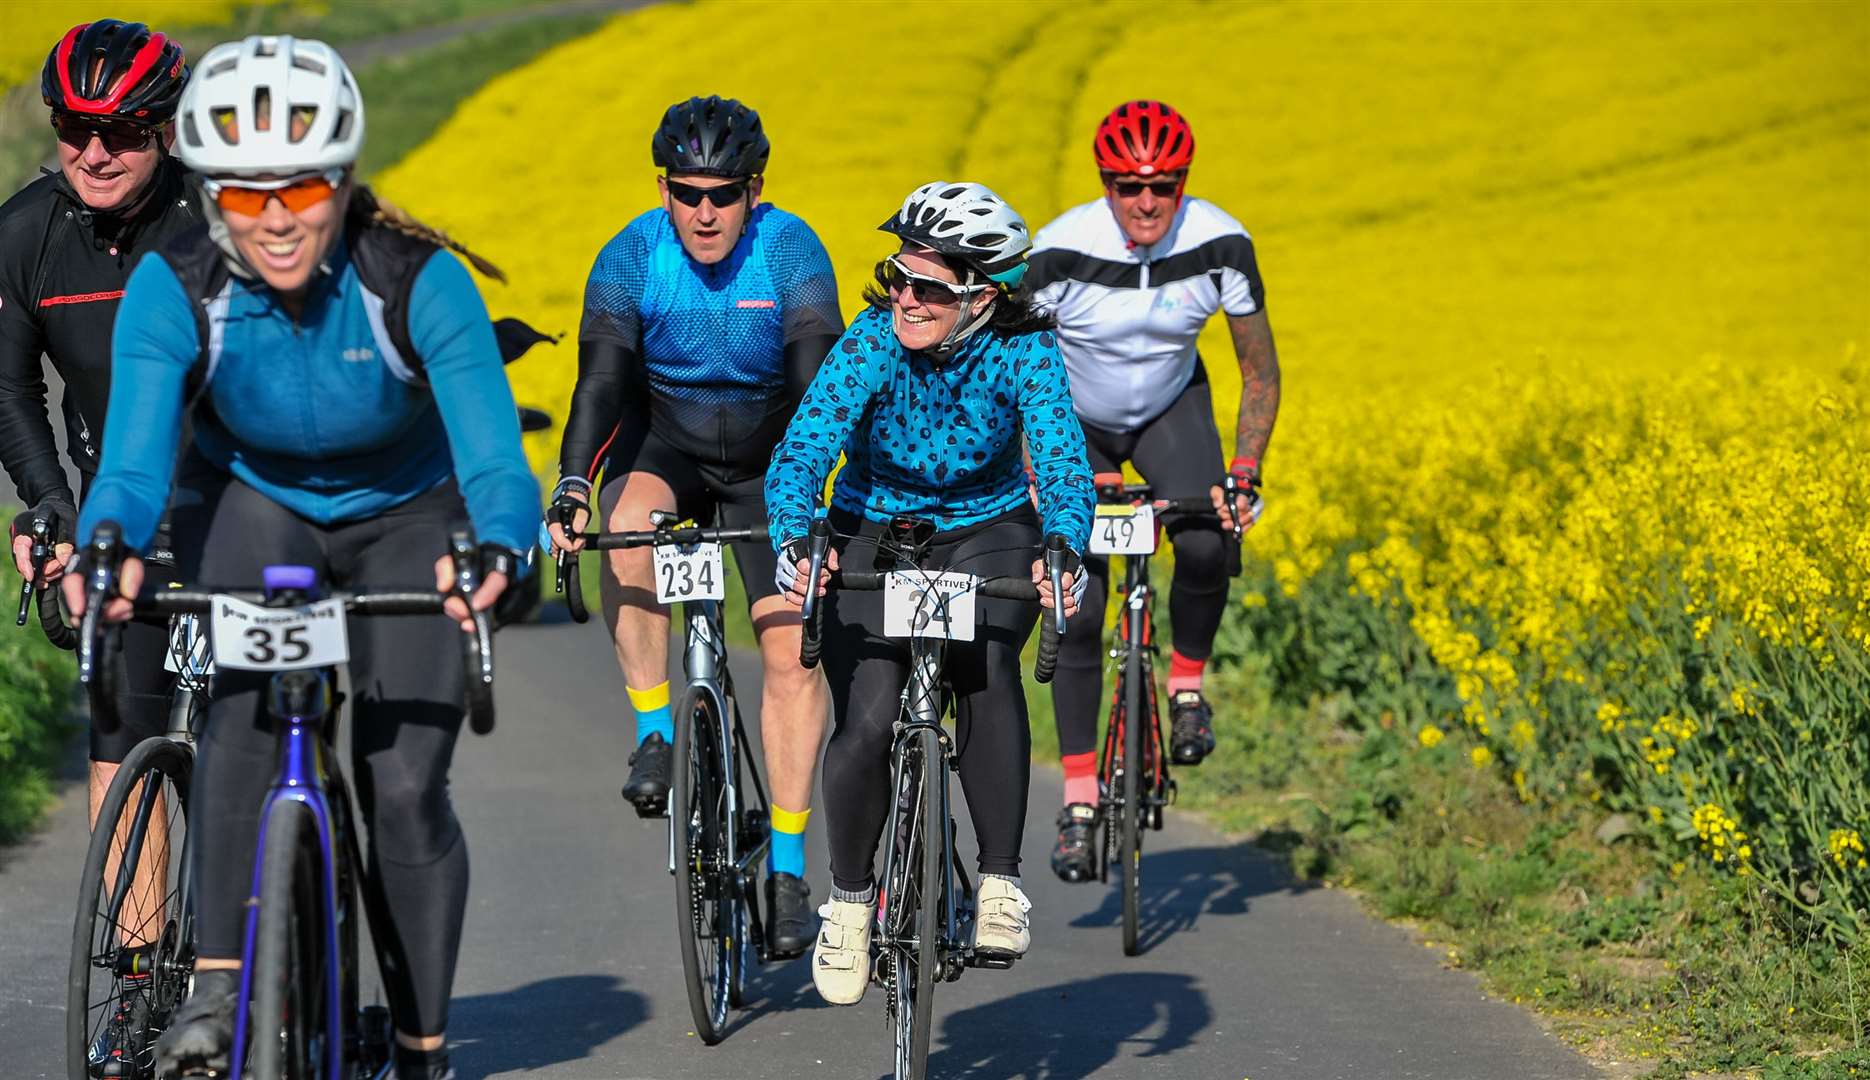 The Big East Kent Bike Ride took place this April from Betteshanger Park in Deal. Picture: KM Charity Team